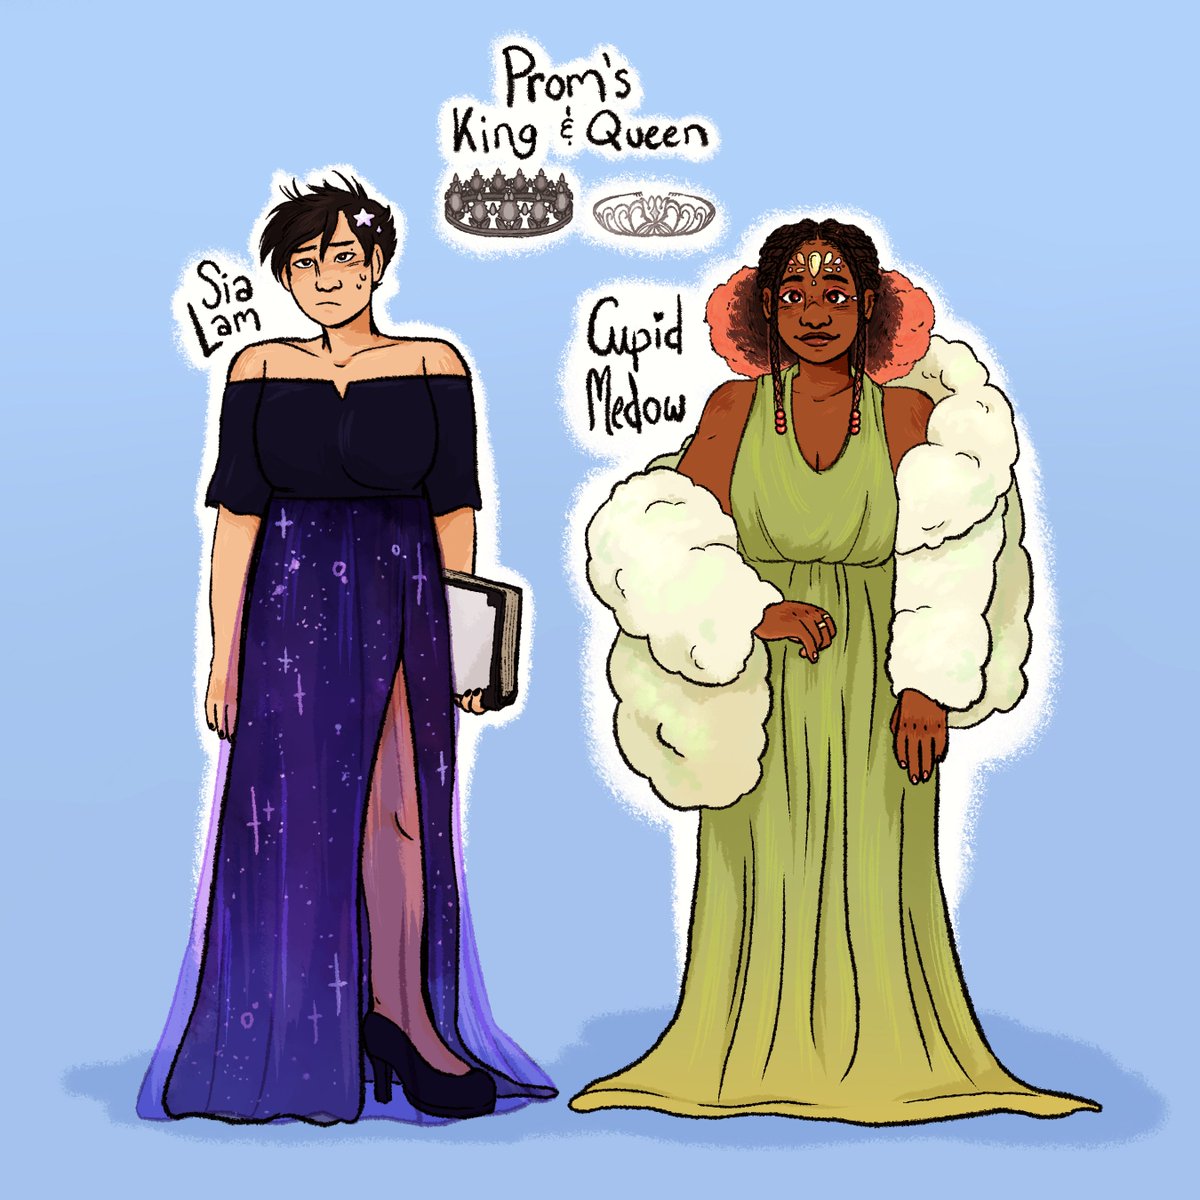 [oc art] outfit designs for prom for these two! 